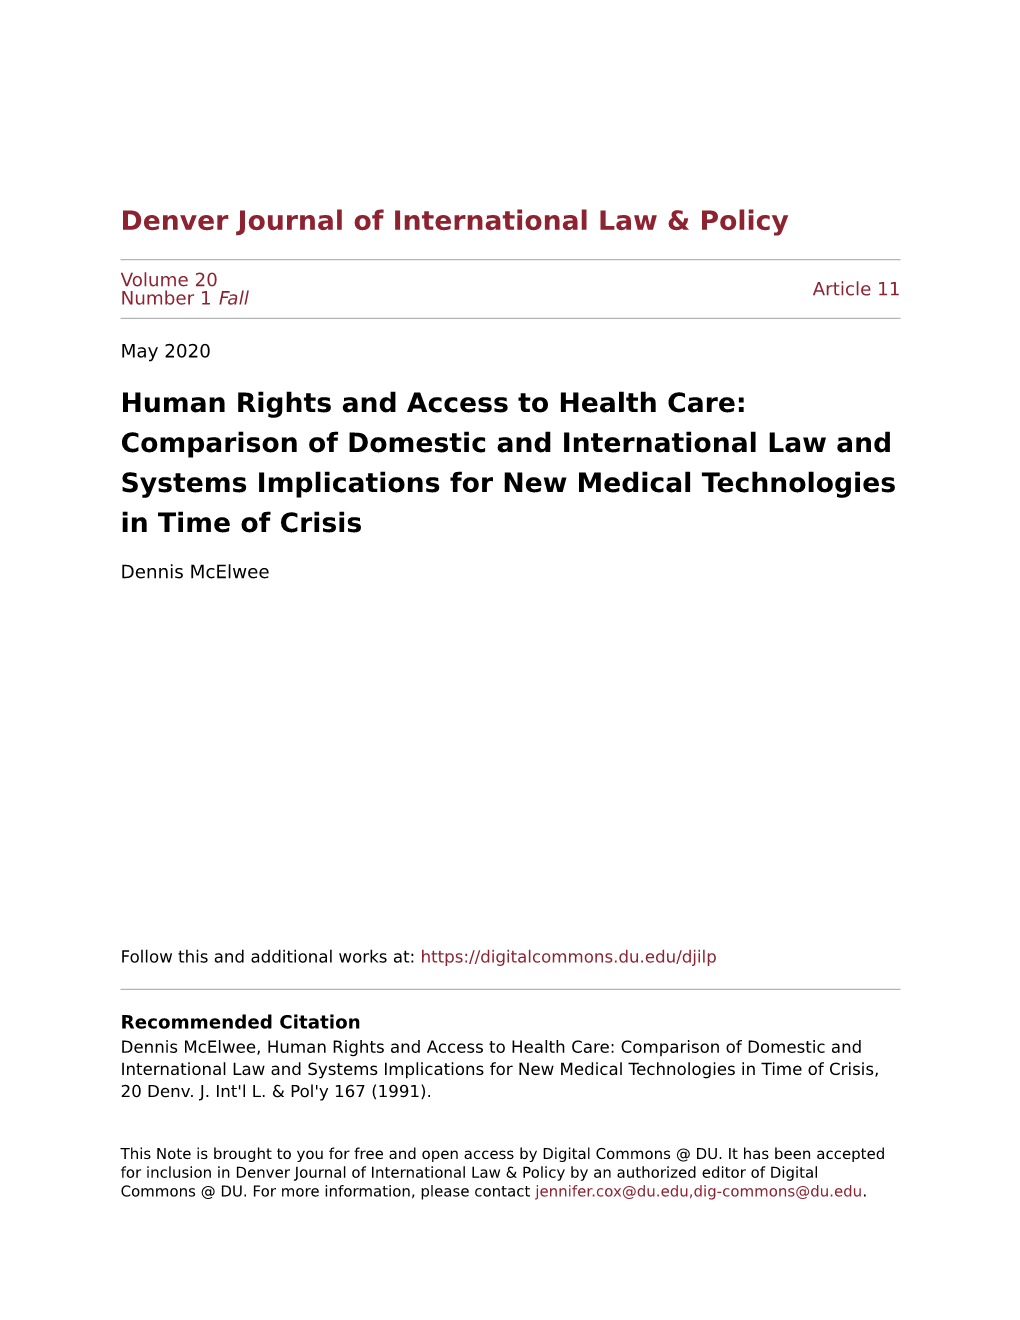 Comparison of Domestic and International Law and Systems Implications for New Medical Technologies in Time of Crisis